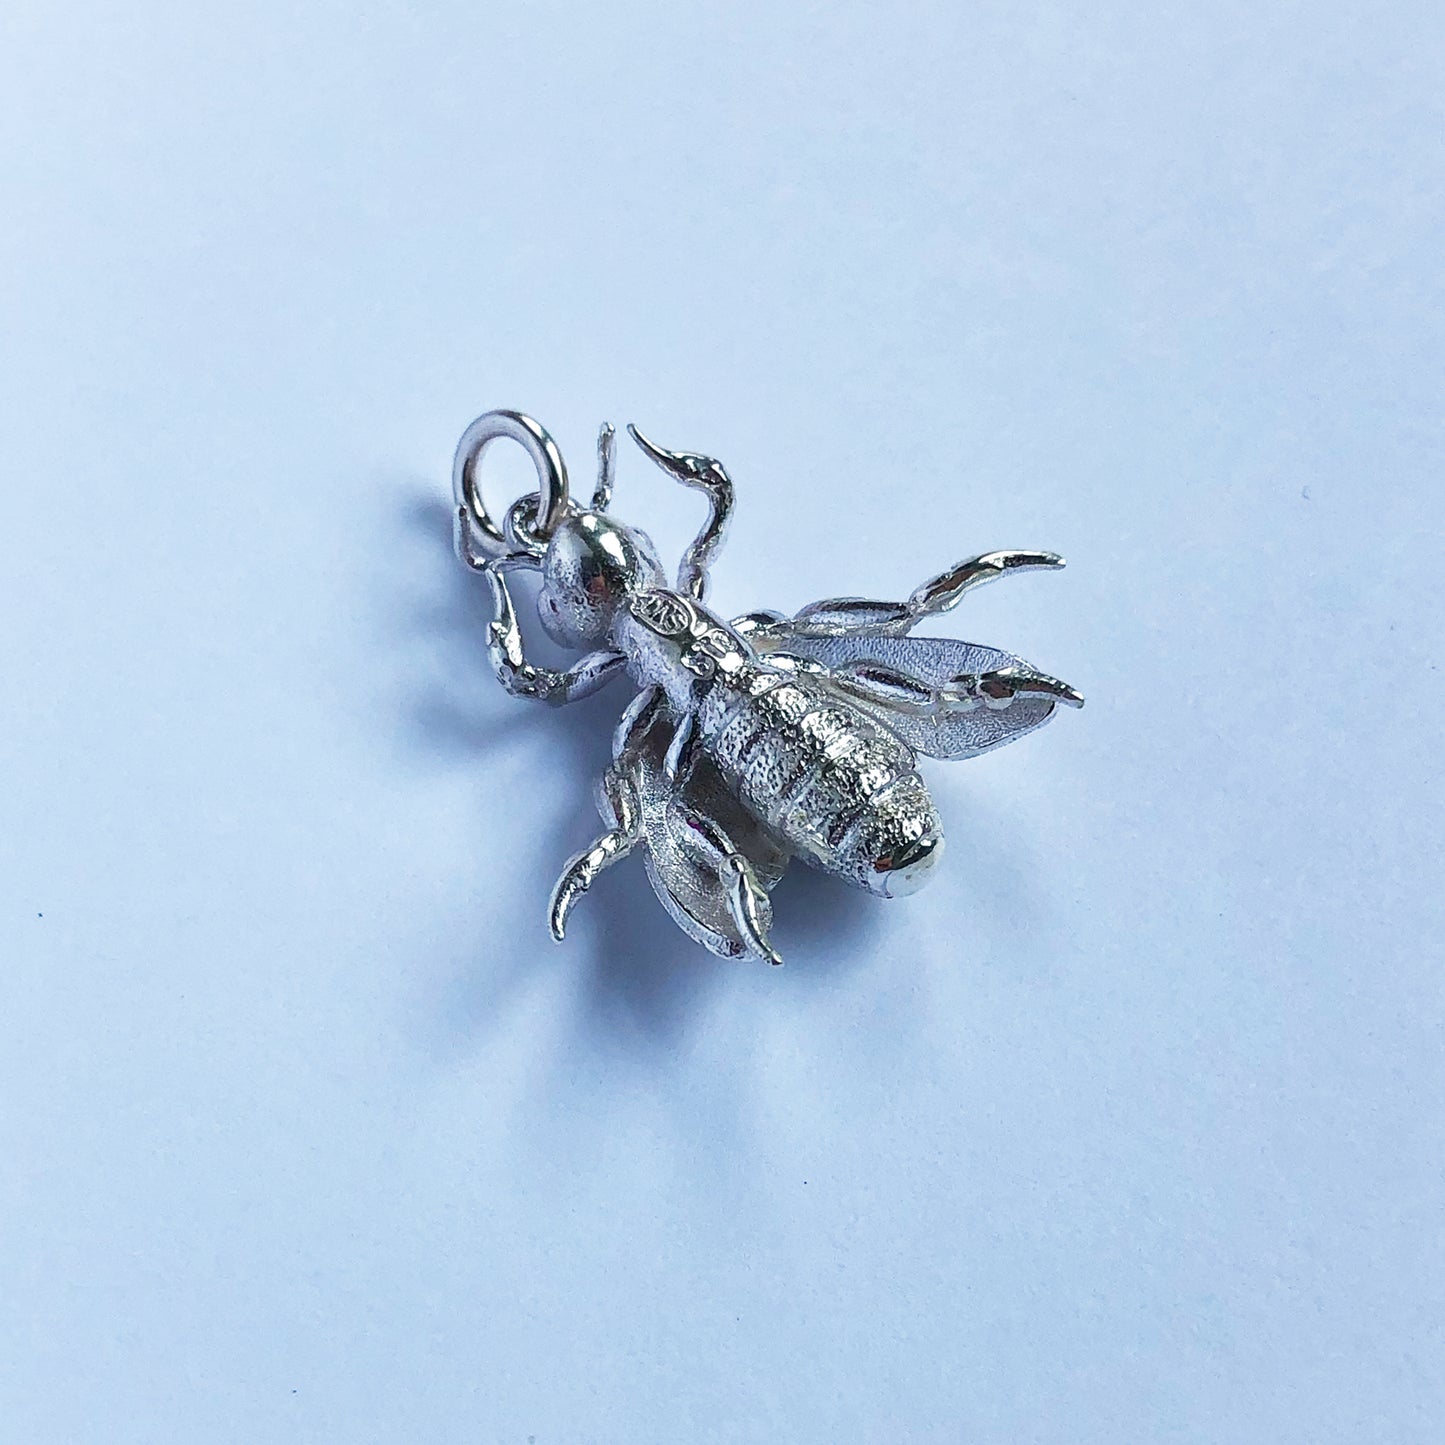 3D Honey Bee Charm Sterling Silver or Gold Pendant